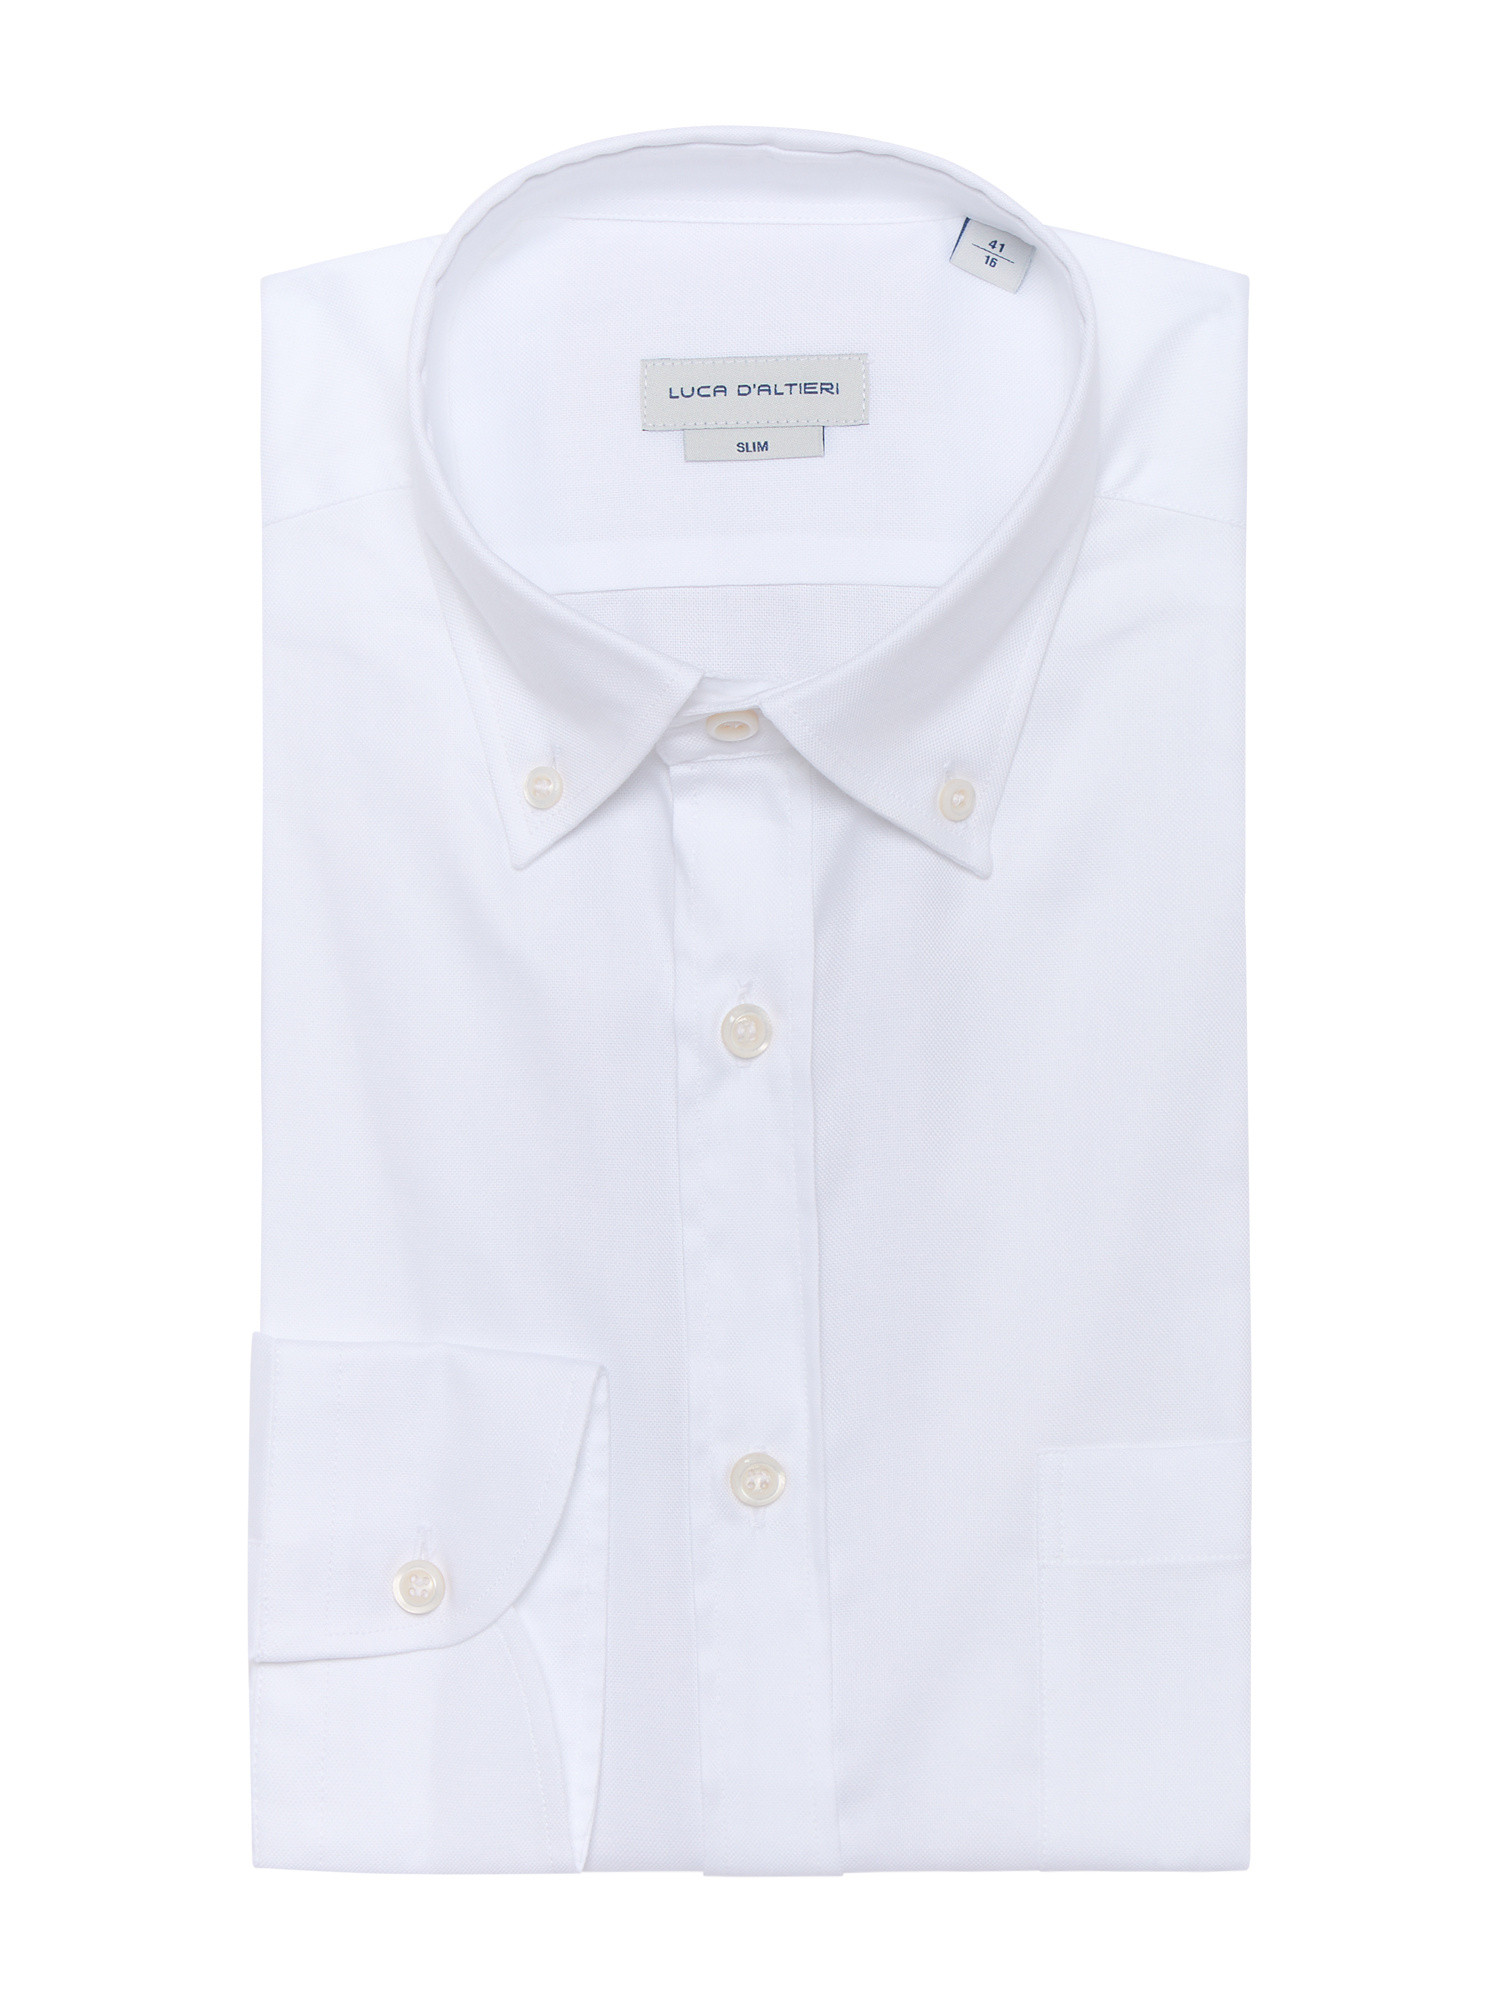 Luca D'Altieri - Casual slim fit shirt in pure cotton oxford, White, large image number 0